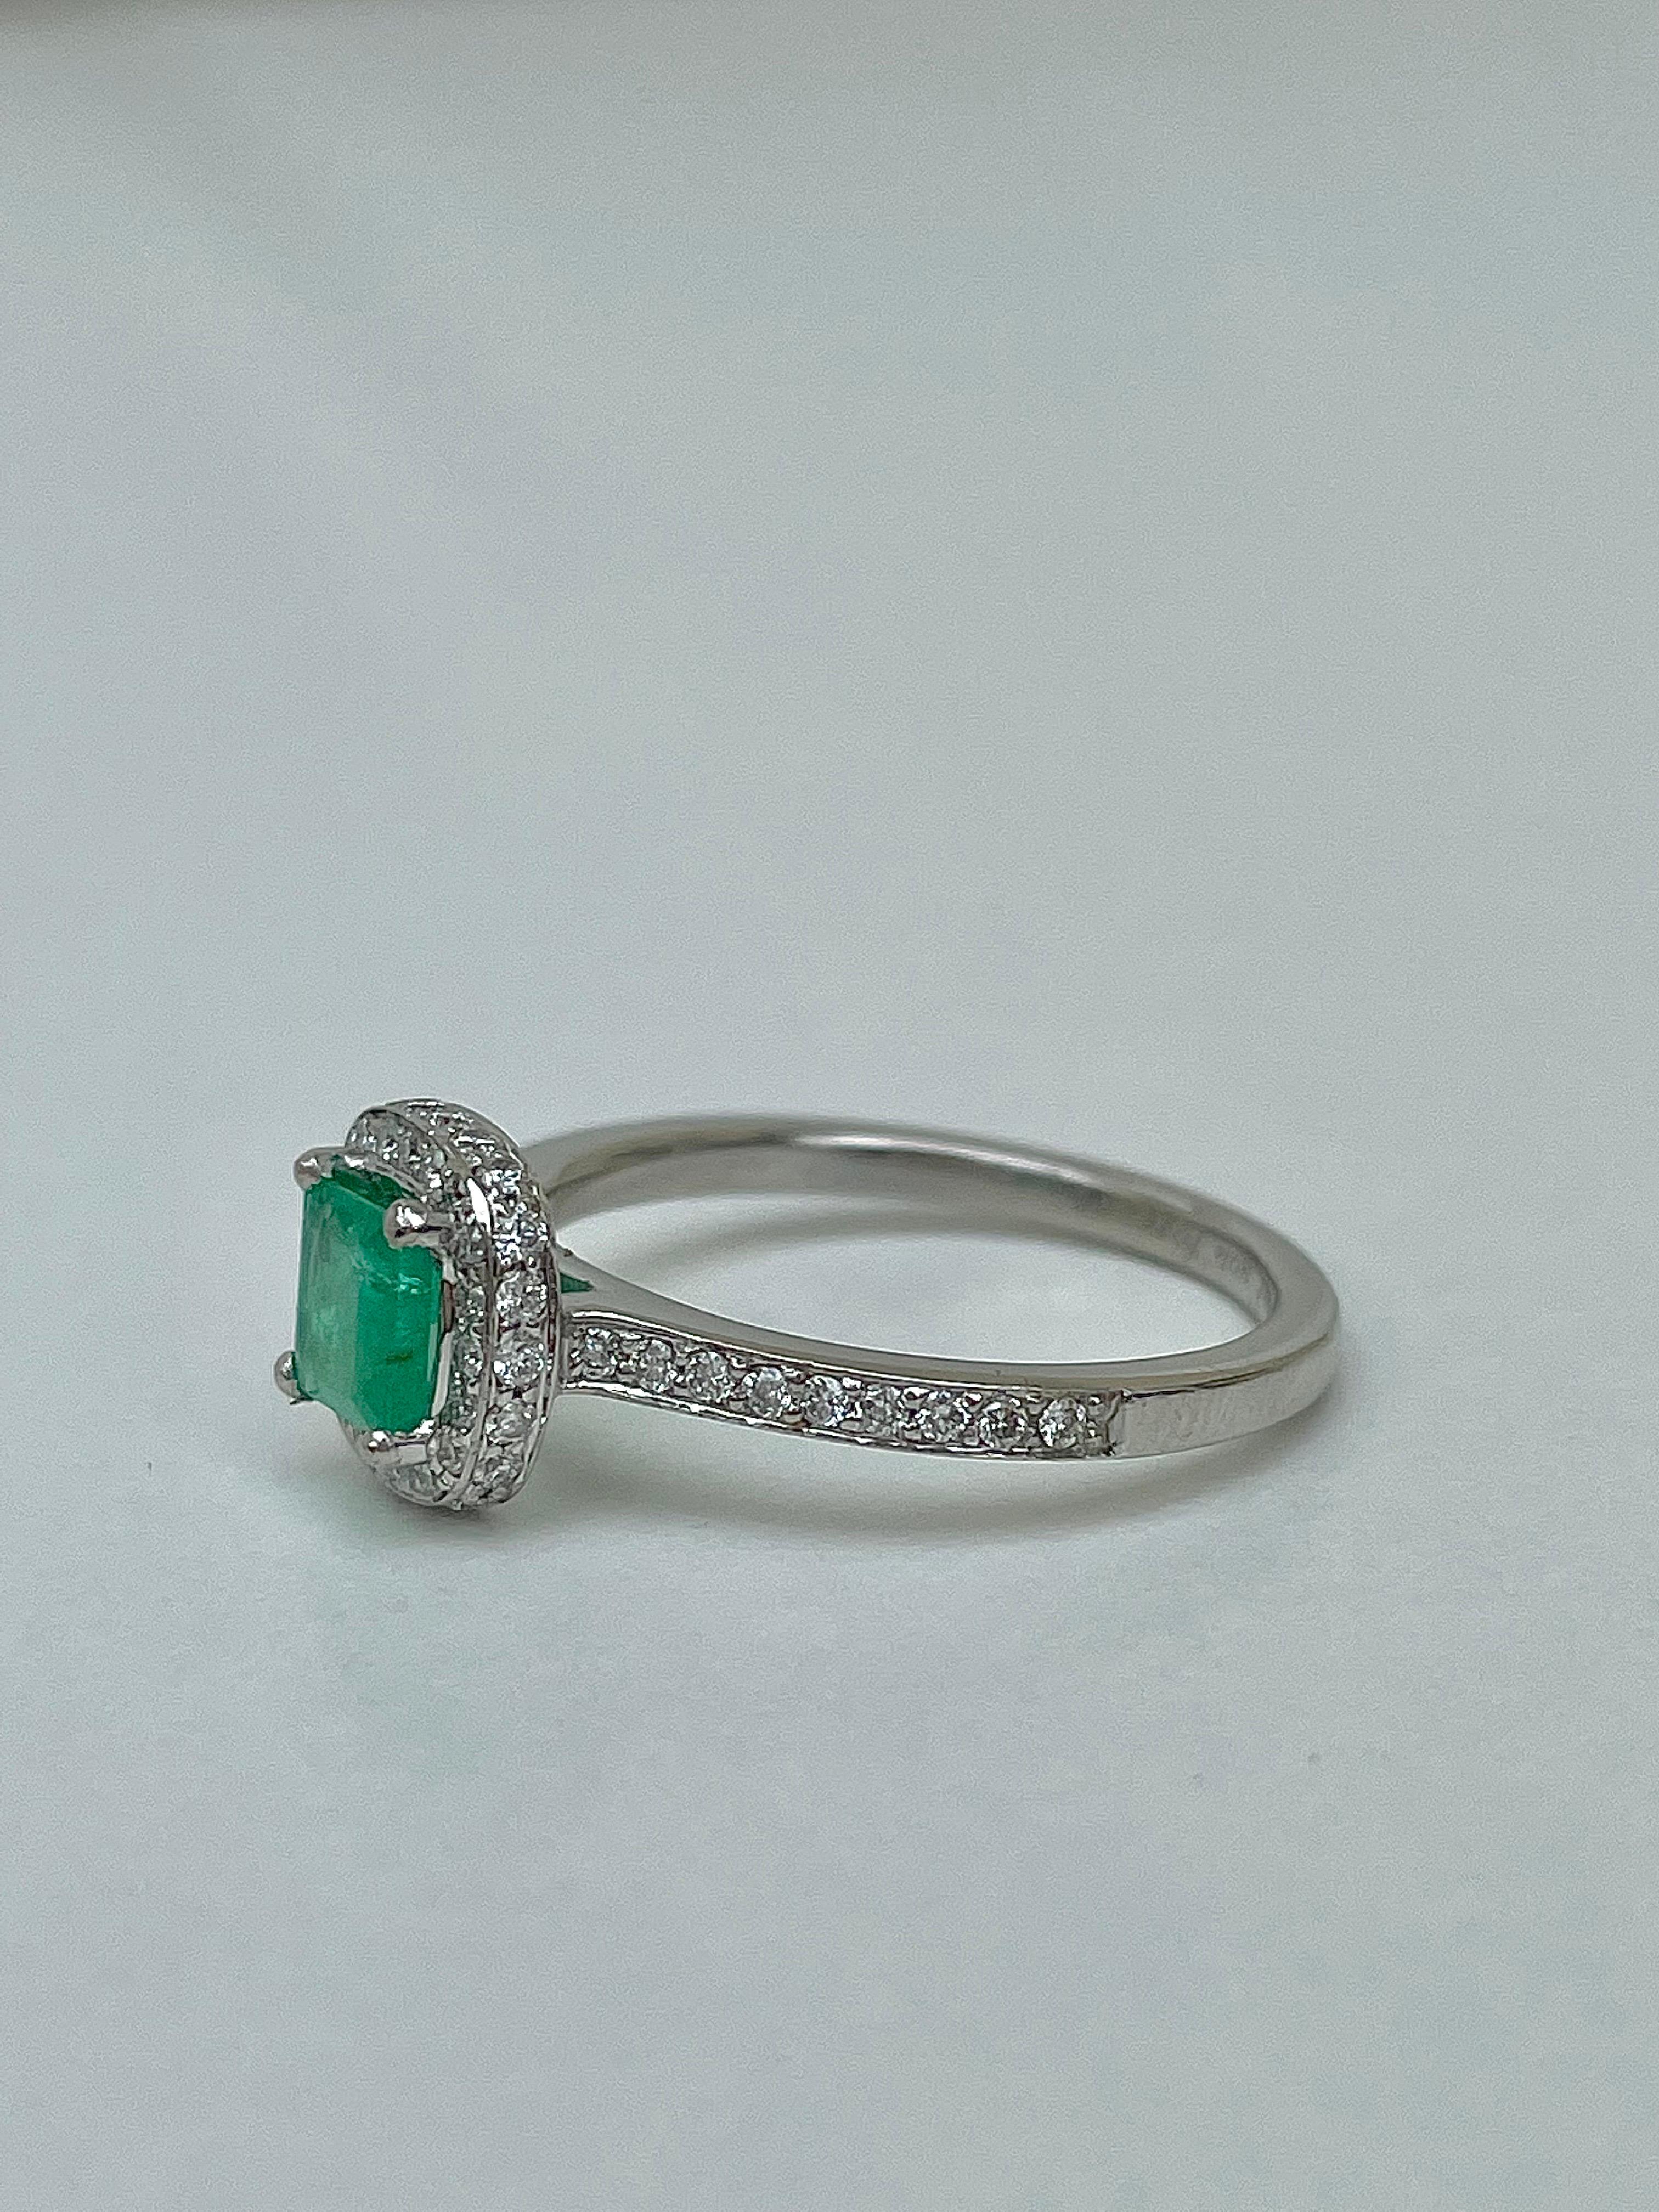 Vintage Platinum Emerald and Diamond Halo Ring 

exquisite diamond and emerald ring, the emerald stone is everything!

The item comes without the box in the photos but will be presented in a gift box

Measurements: weight 5.33g, size UK O, head of